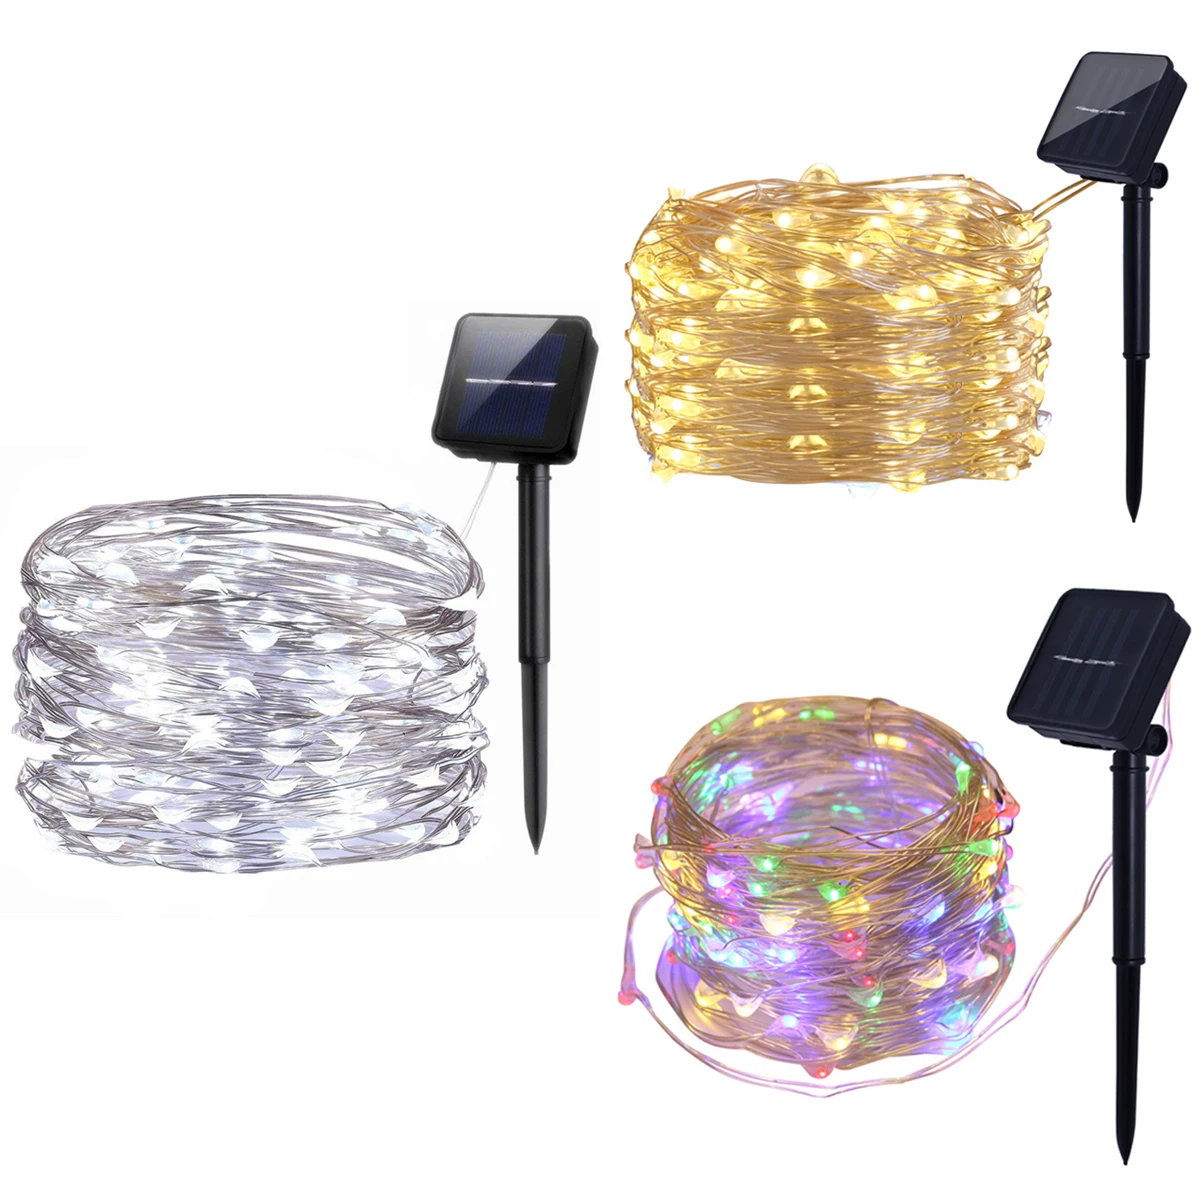 

New Solar String Lights, 10M 100LED Outdoor String Lights, Waterproof Decorative String Lights For Patio, Garden, Gate, Yard, Pa